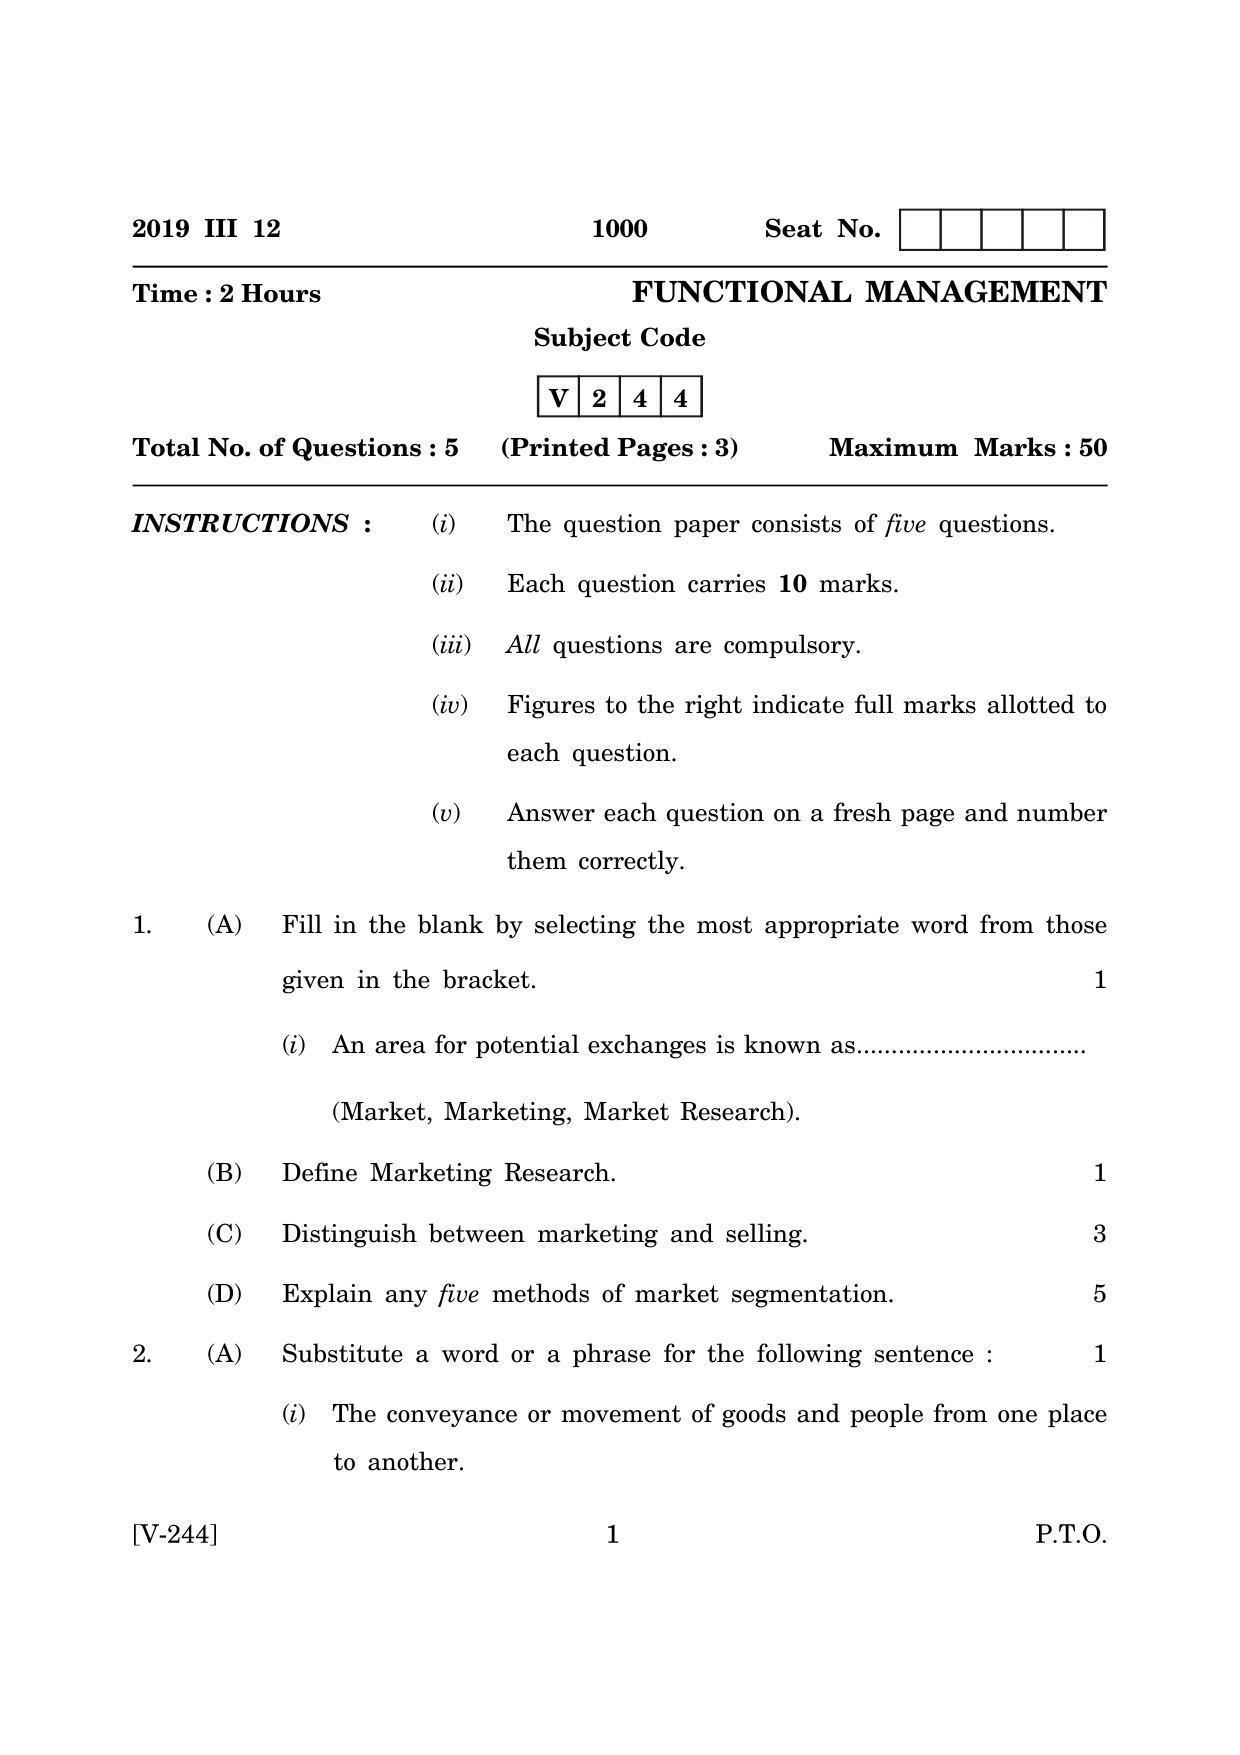 Goa Board Class 12 Functional Management   (March 2019) Question Paper - Page 1